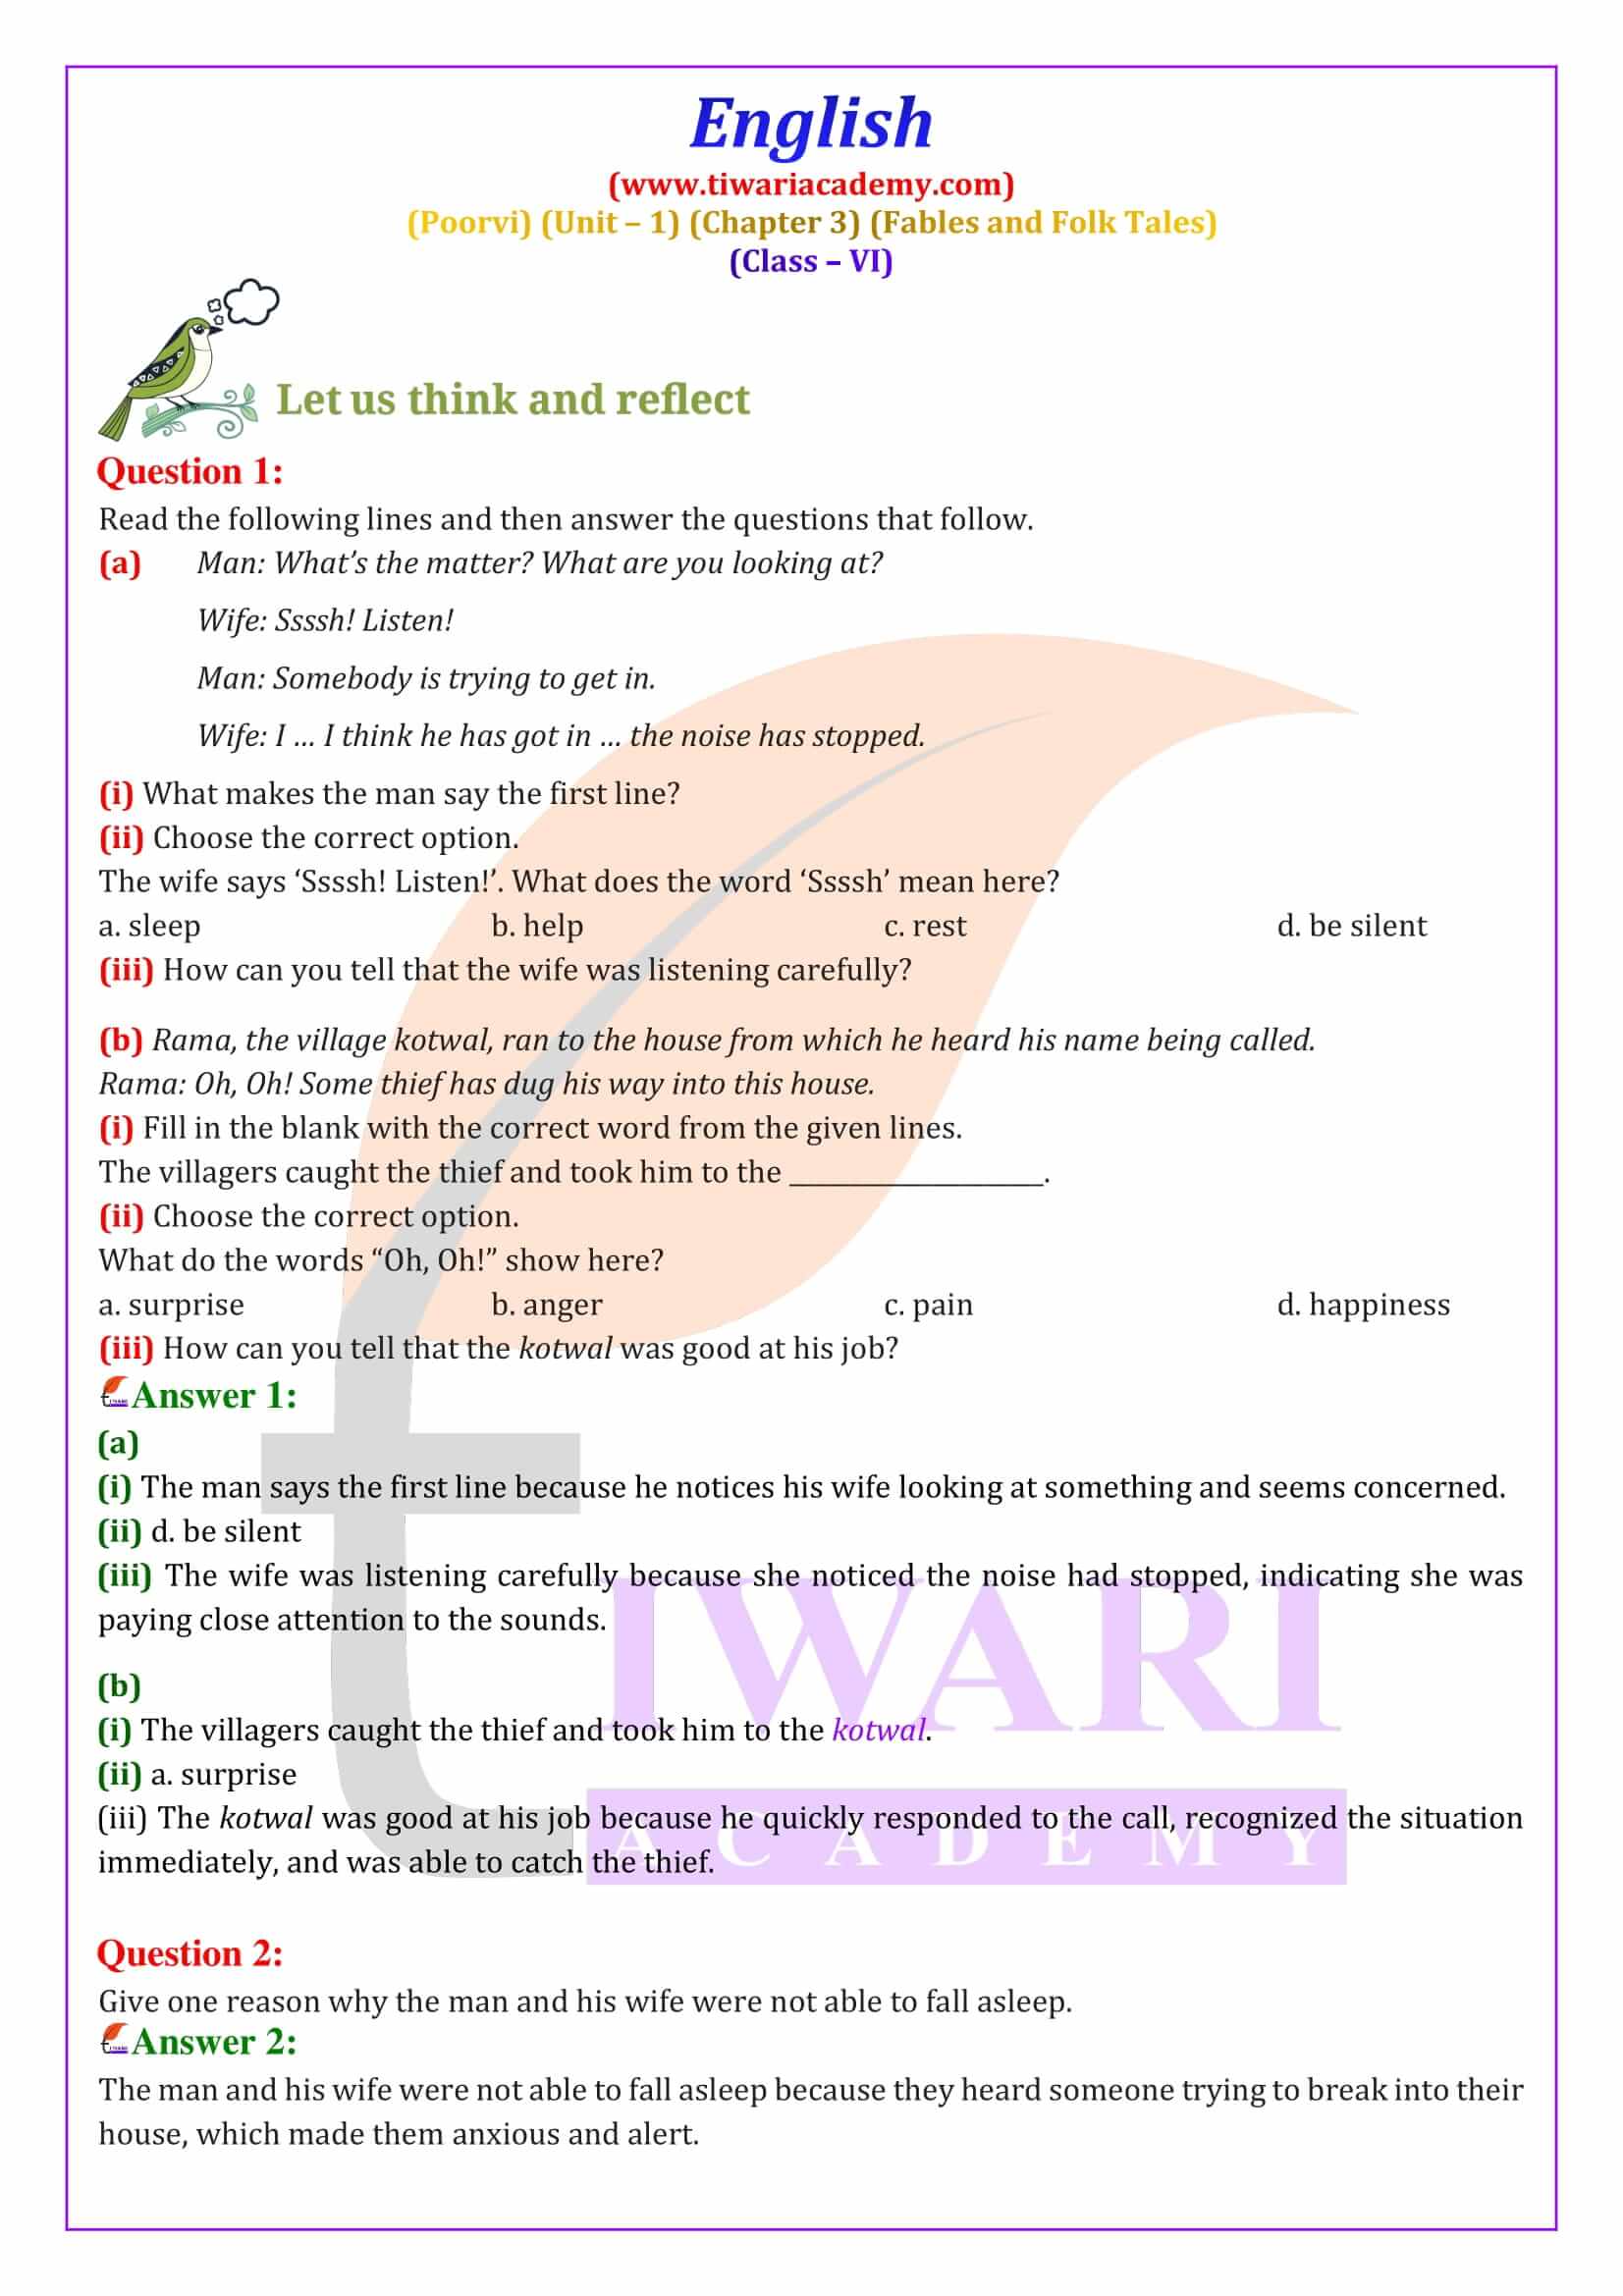 Class 6 English Poorvi Unit 1 Fables and Folk Tales Chapter 3 Rama to the Rescue NCERT Solutions